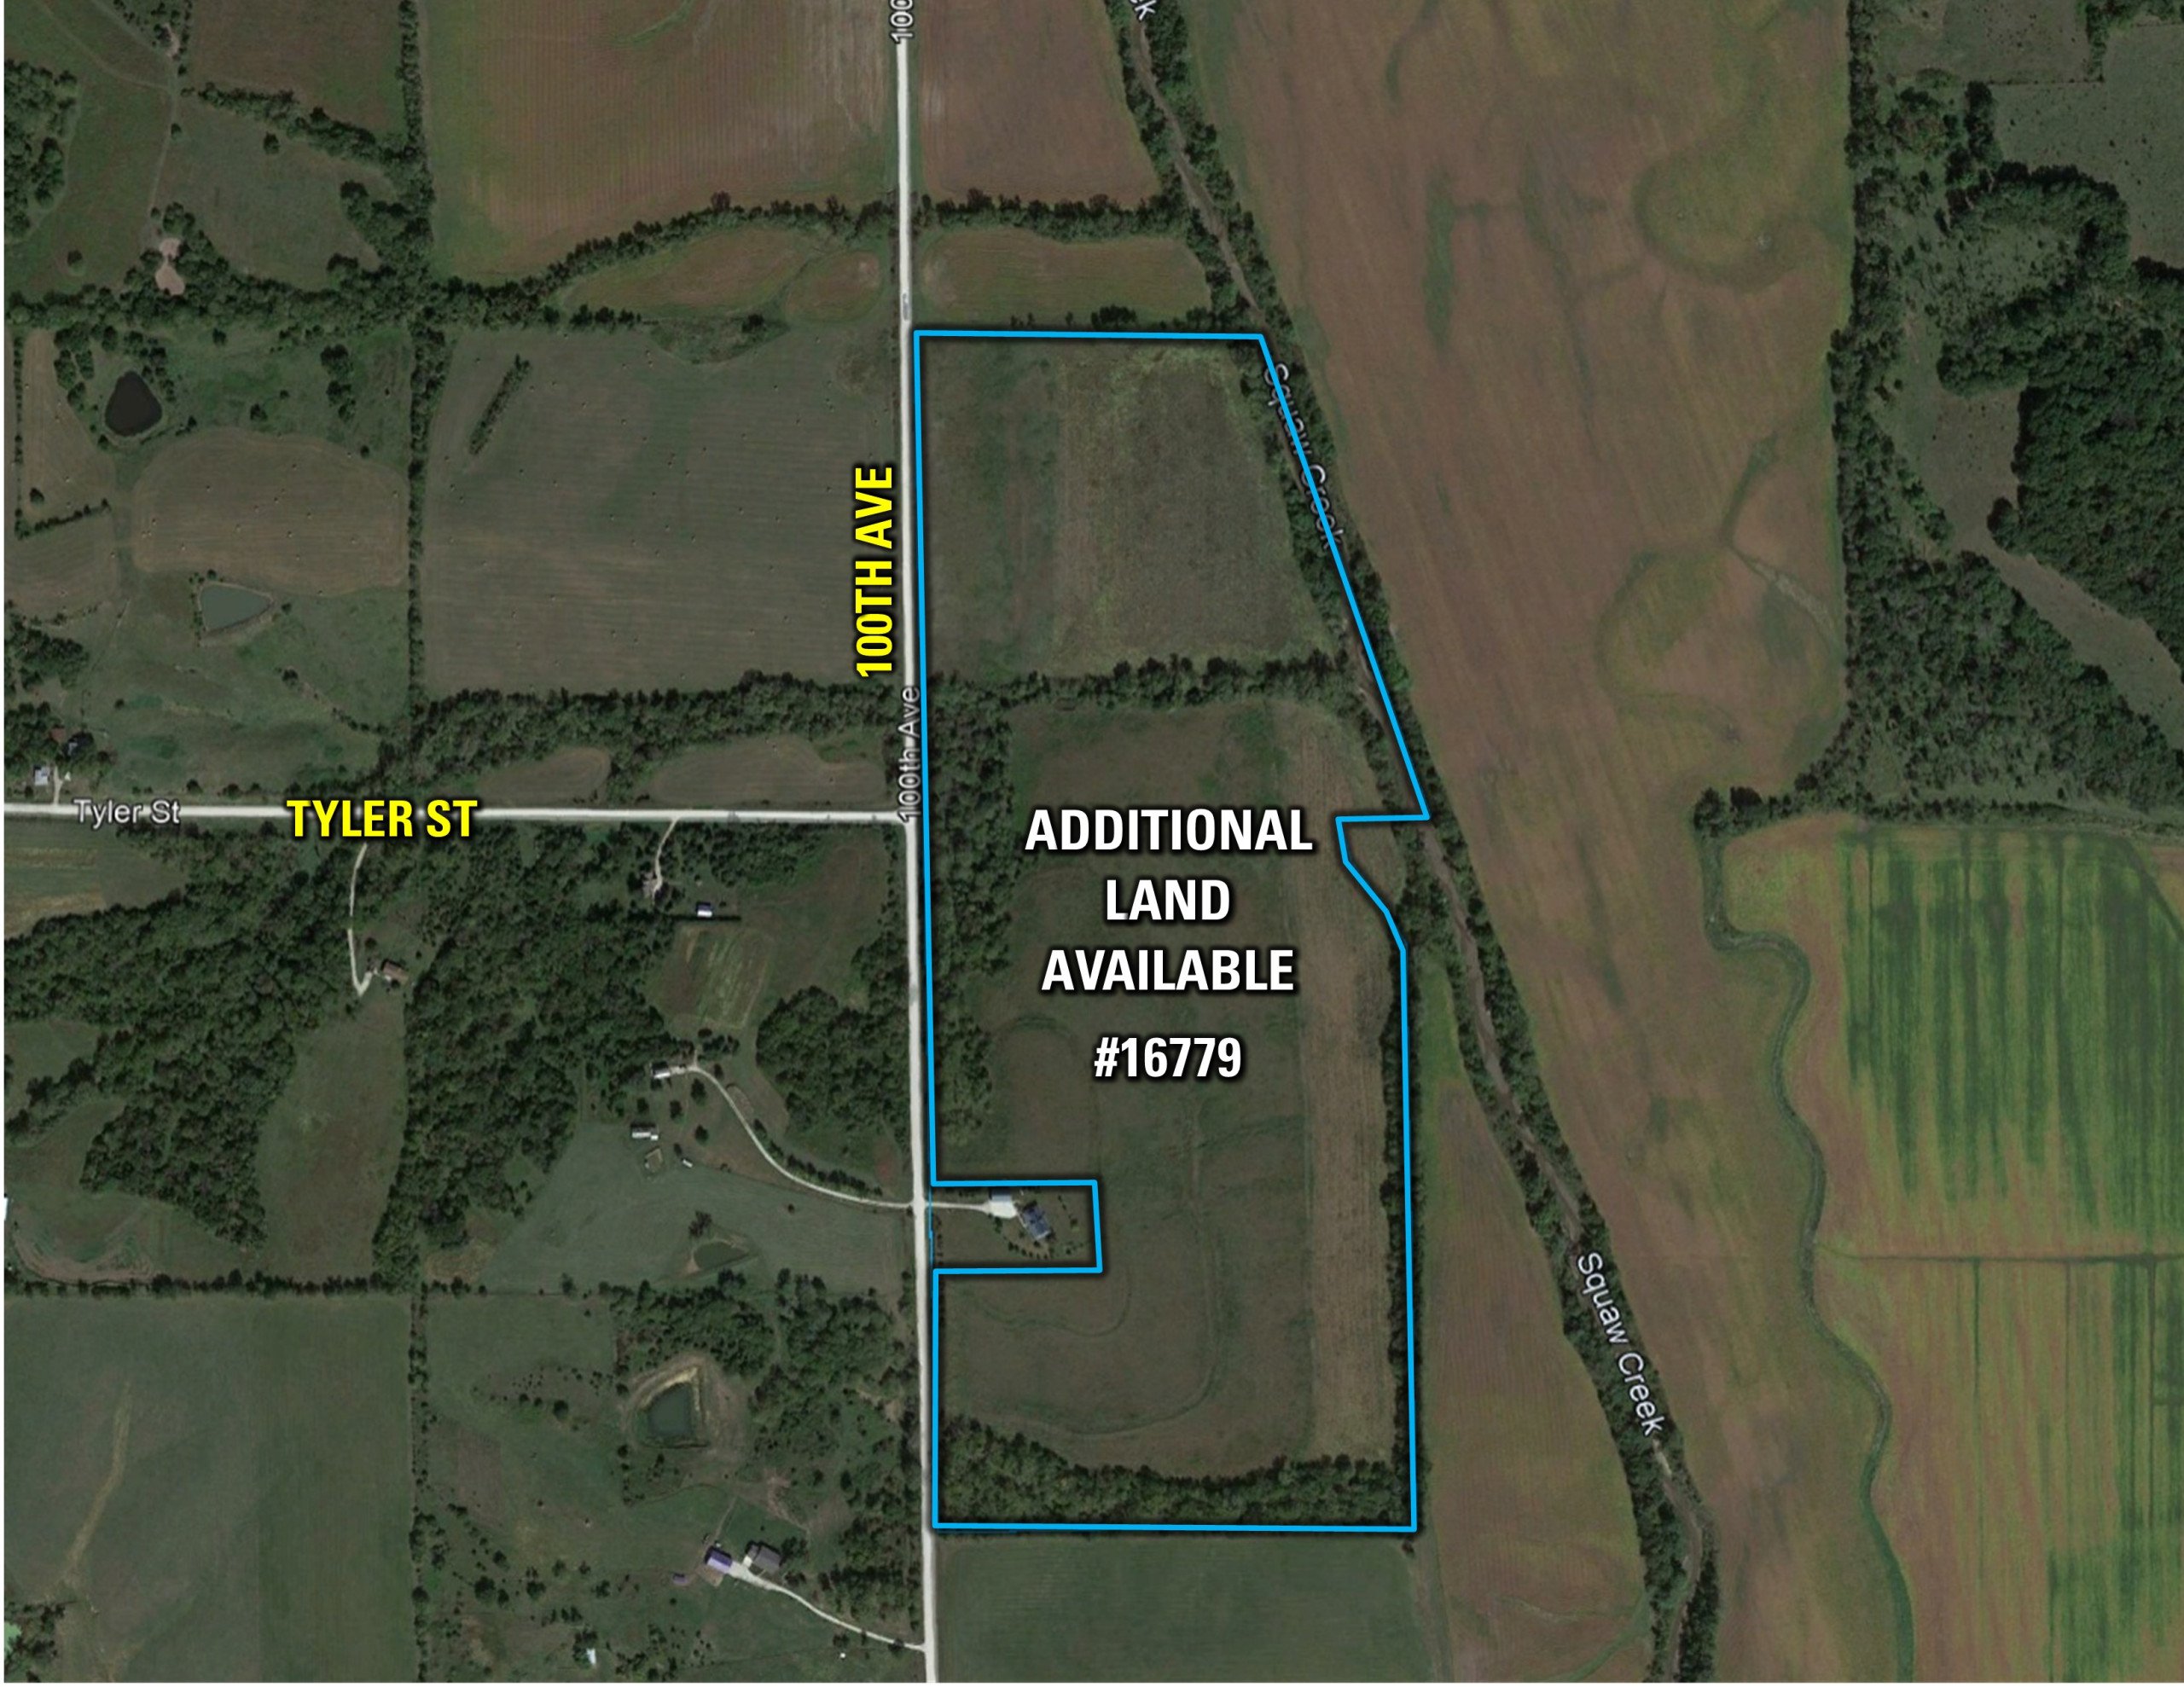 residential-land-warren-county-iowa-4-acres-listing-number-16780-Additional Land Available -0.jpg